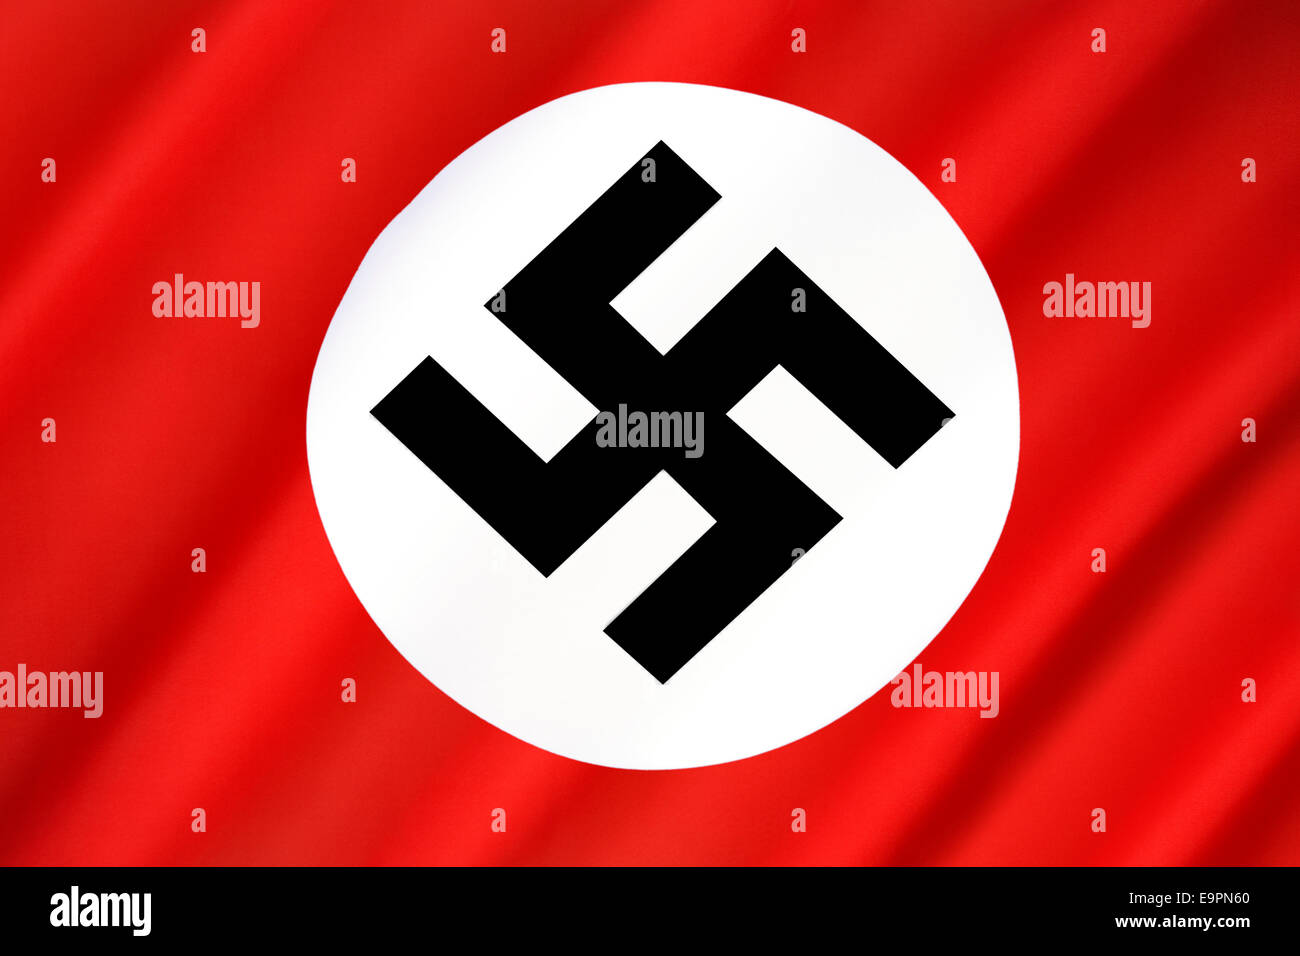 The flag of Nazi Germany - Third Reich - World War II (1933 - 45). Stock Photo